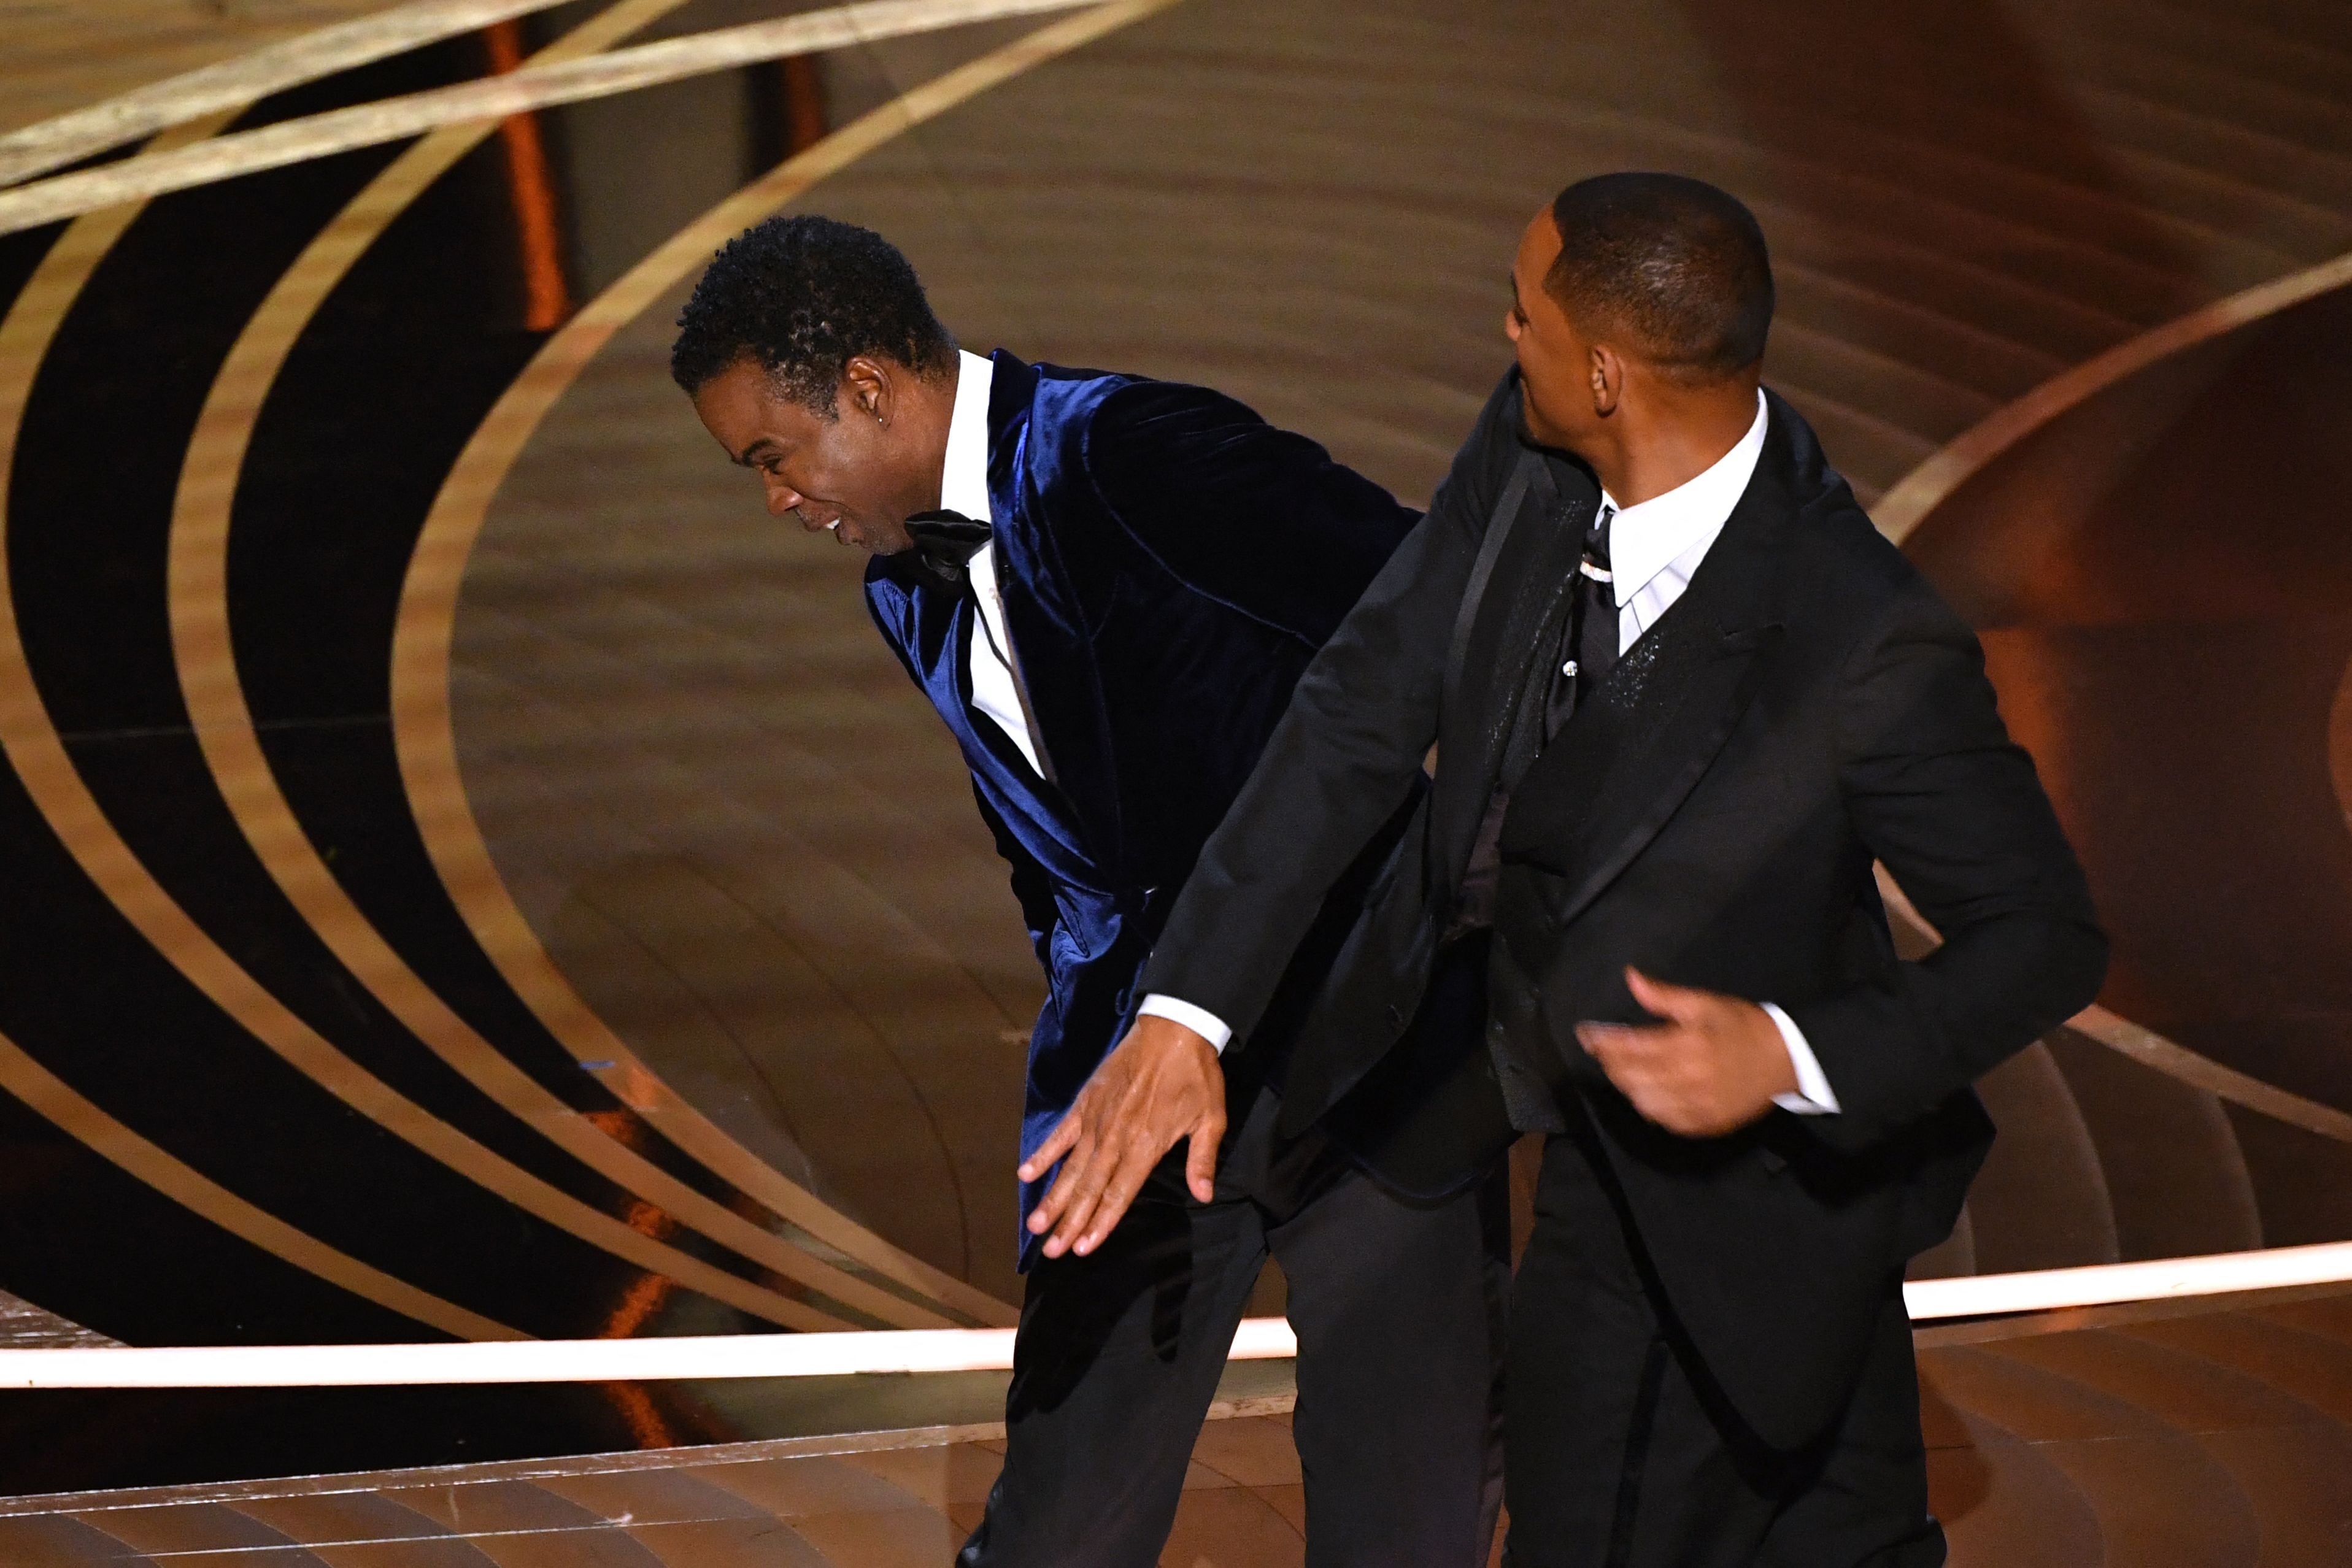 The moment Smith slapped Rock at the Oscars